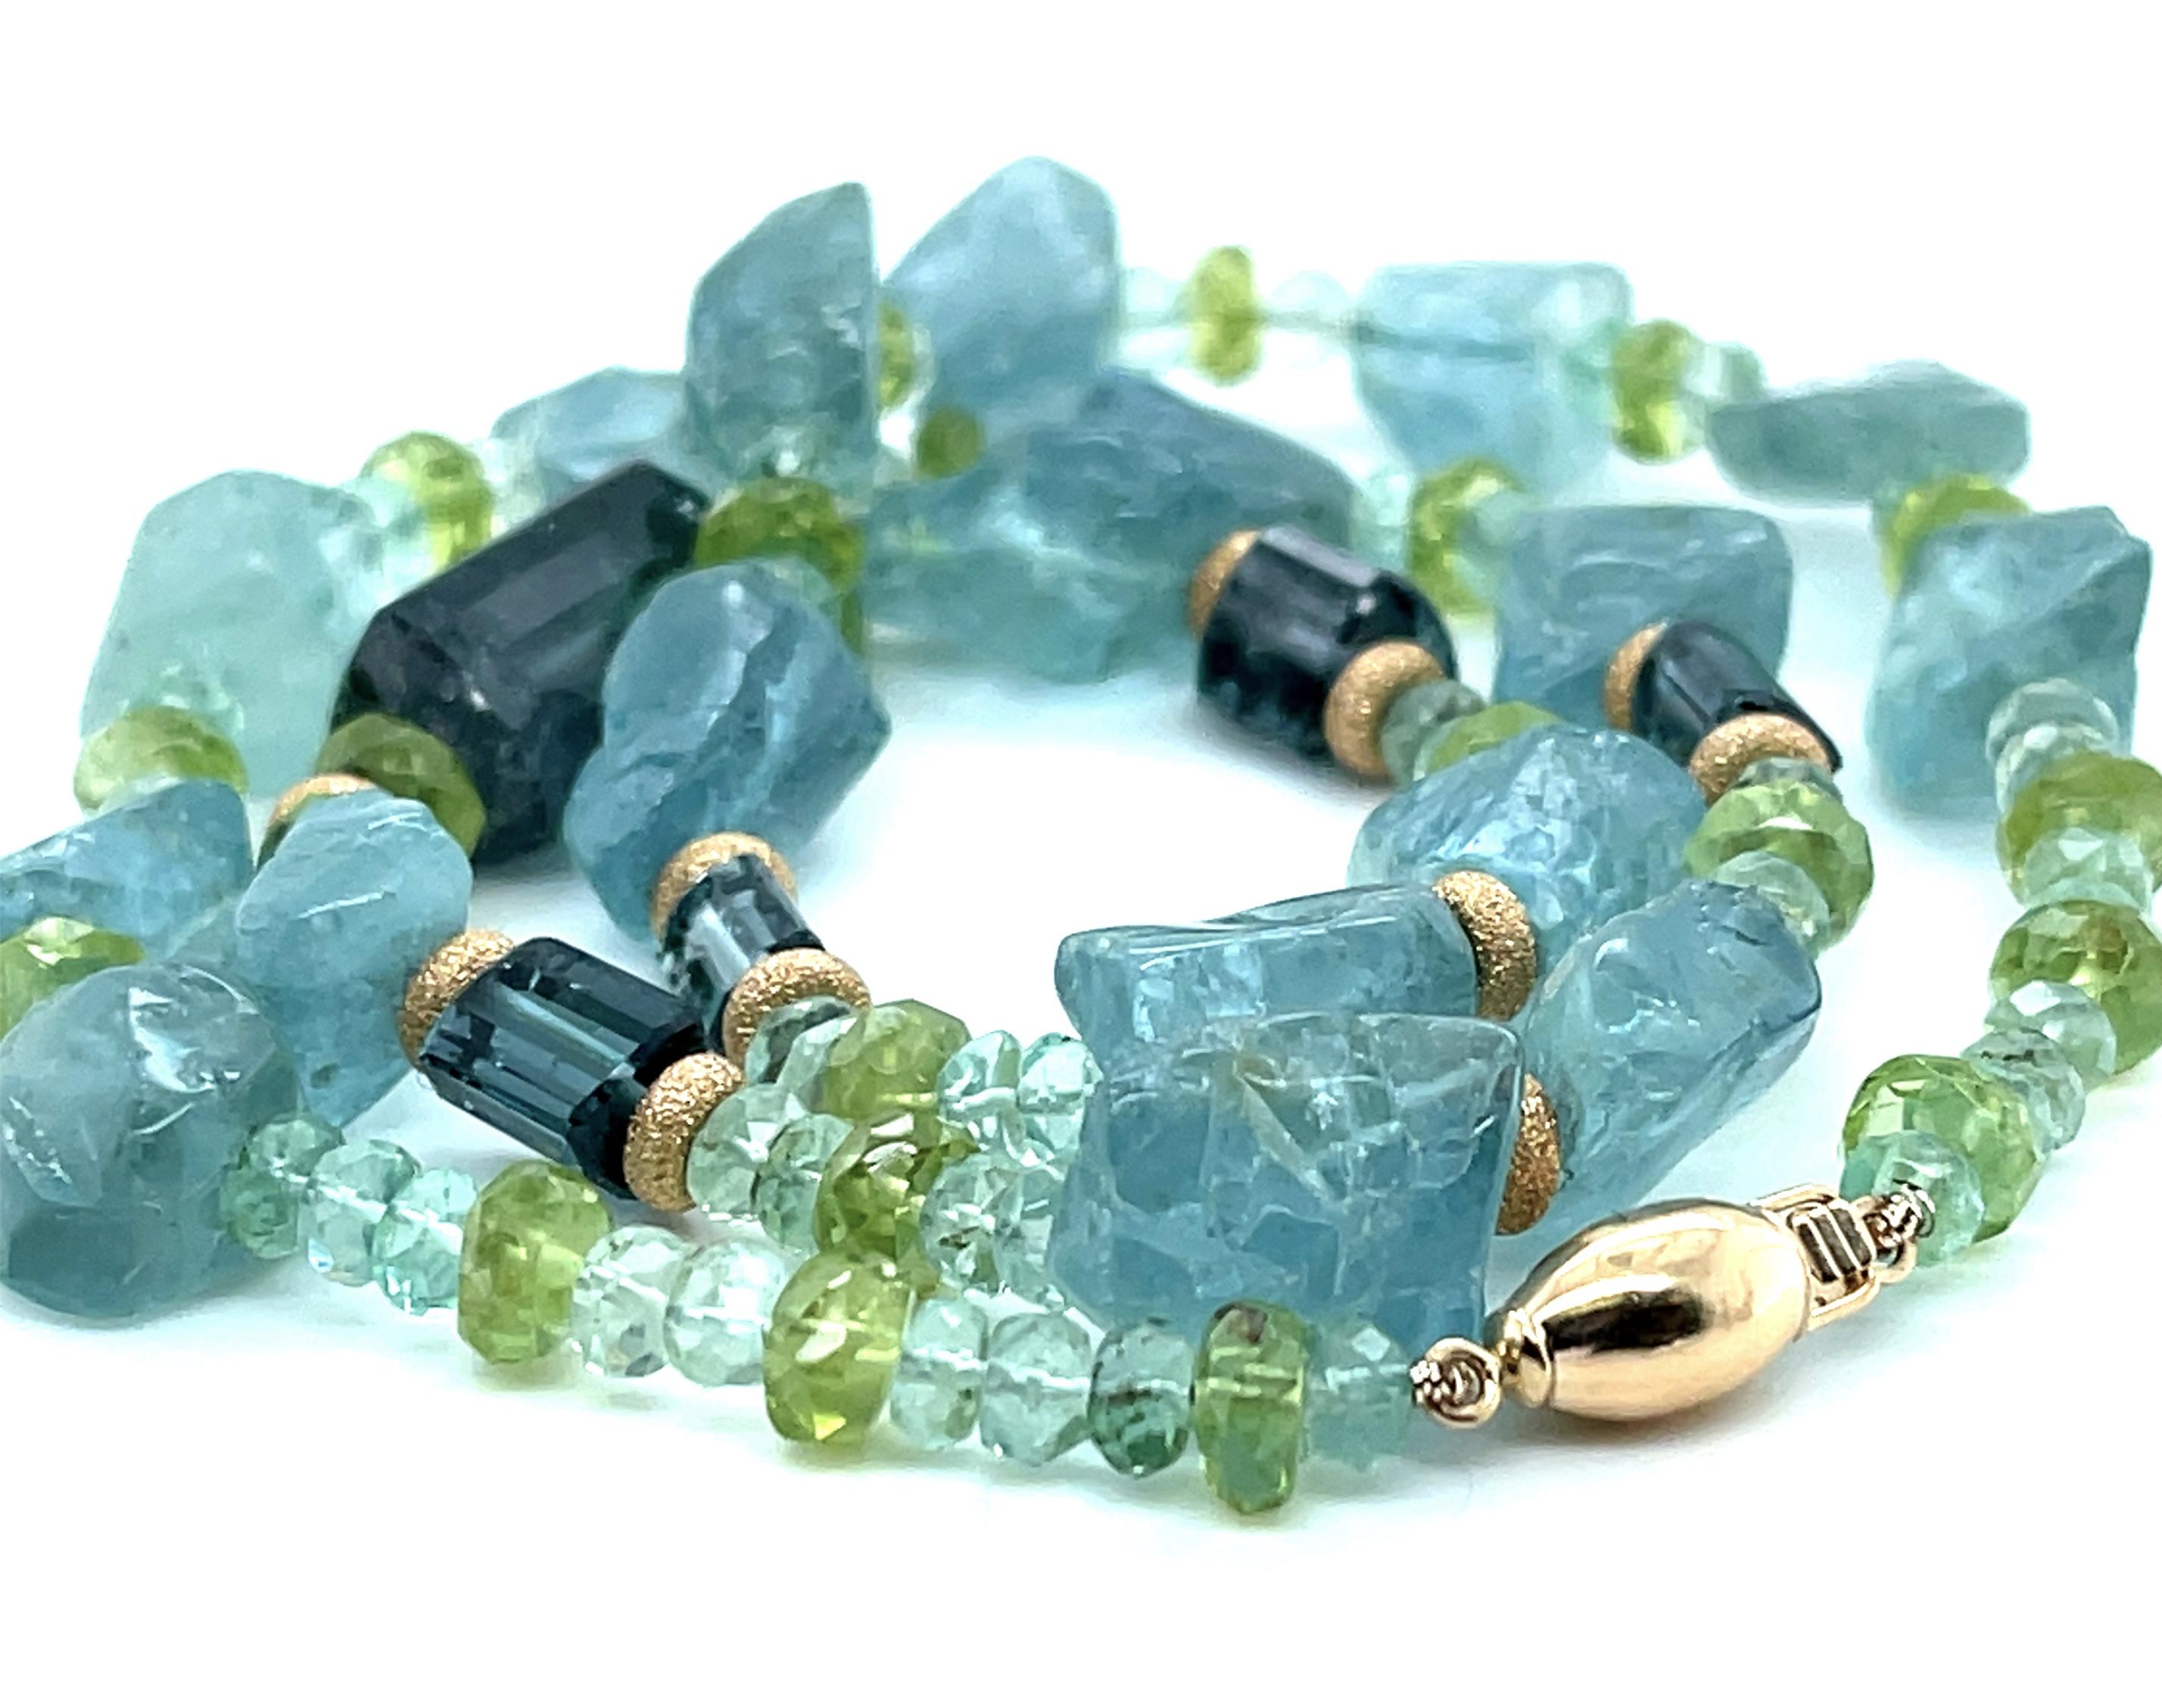 Aquamarine, Indicolite Tourmaline and Peridot Beaded Necklace with Gold Accents 1